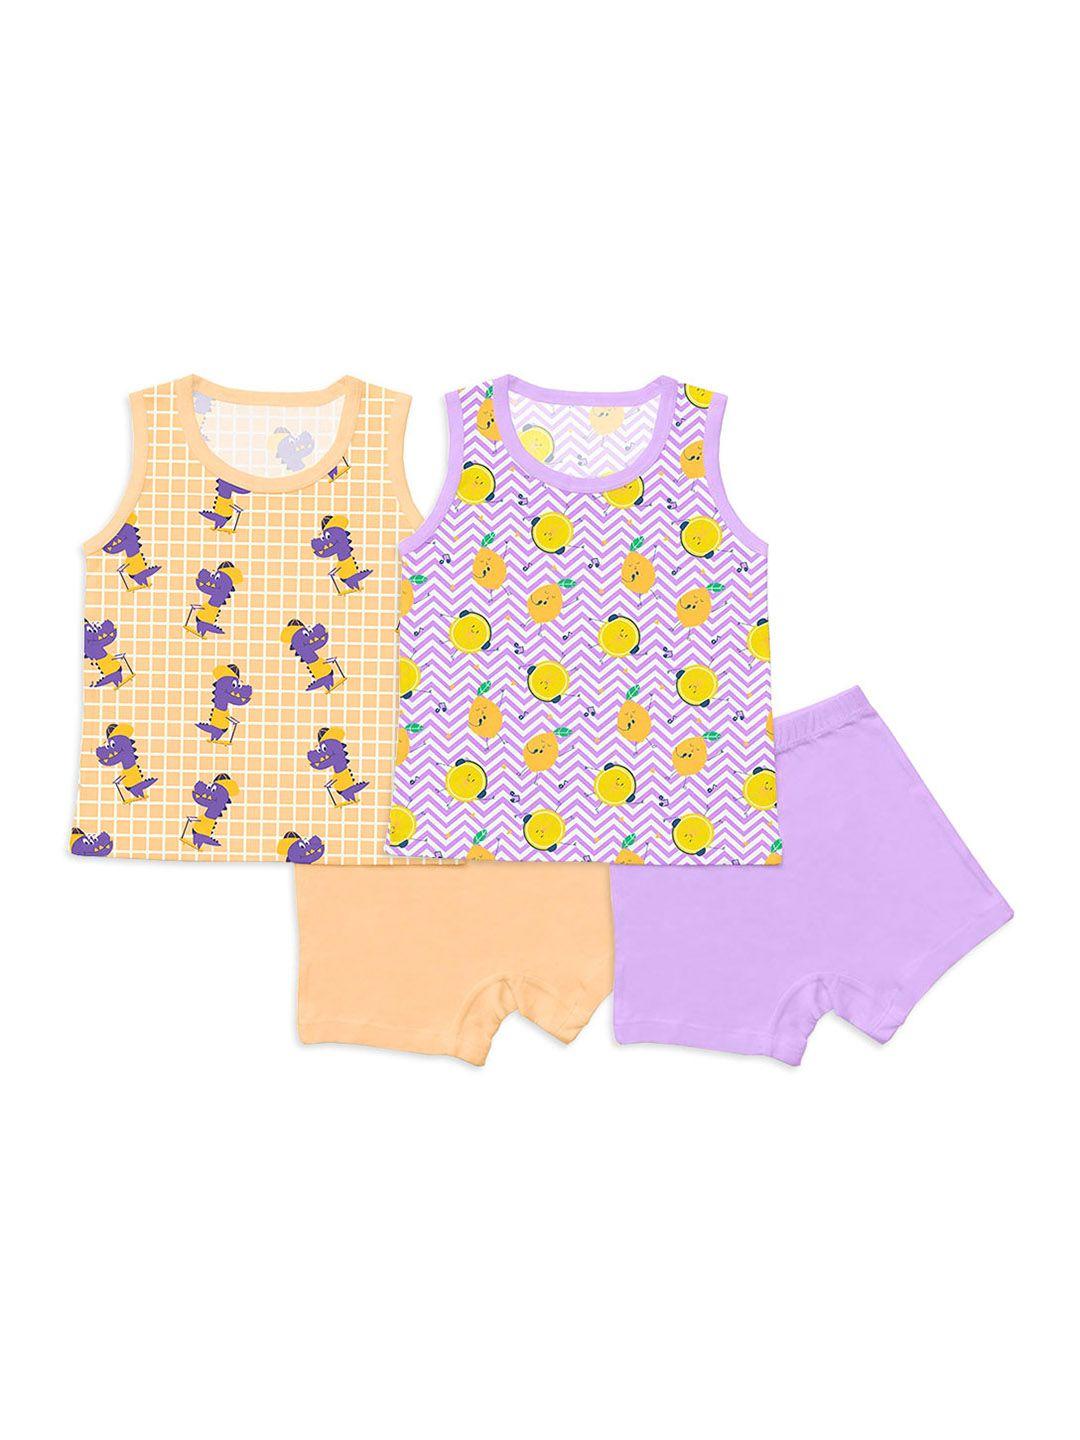 superbottoms pack of 2 unisex kids printed sustainable clothing set